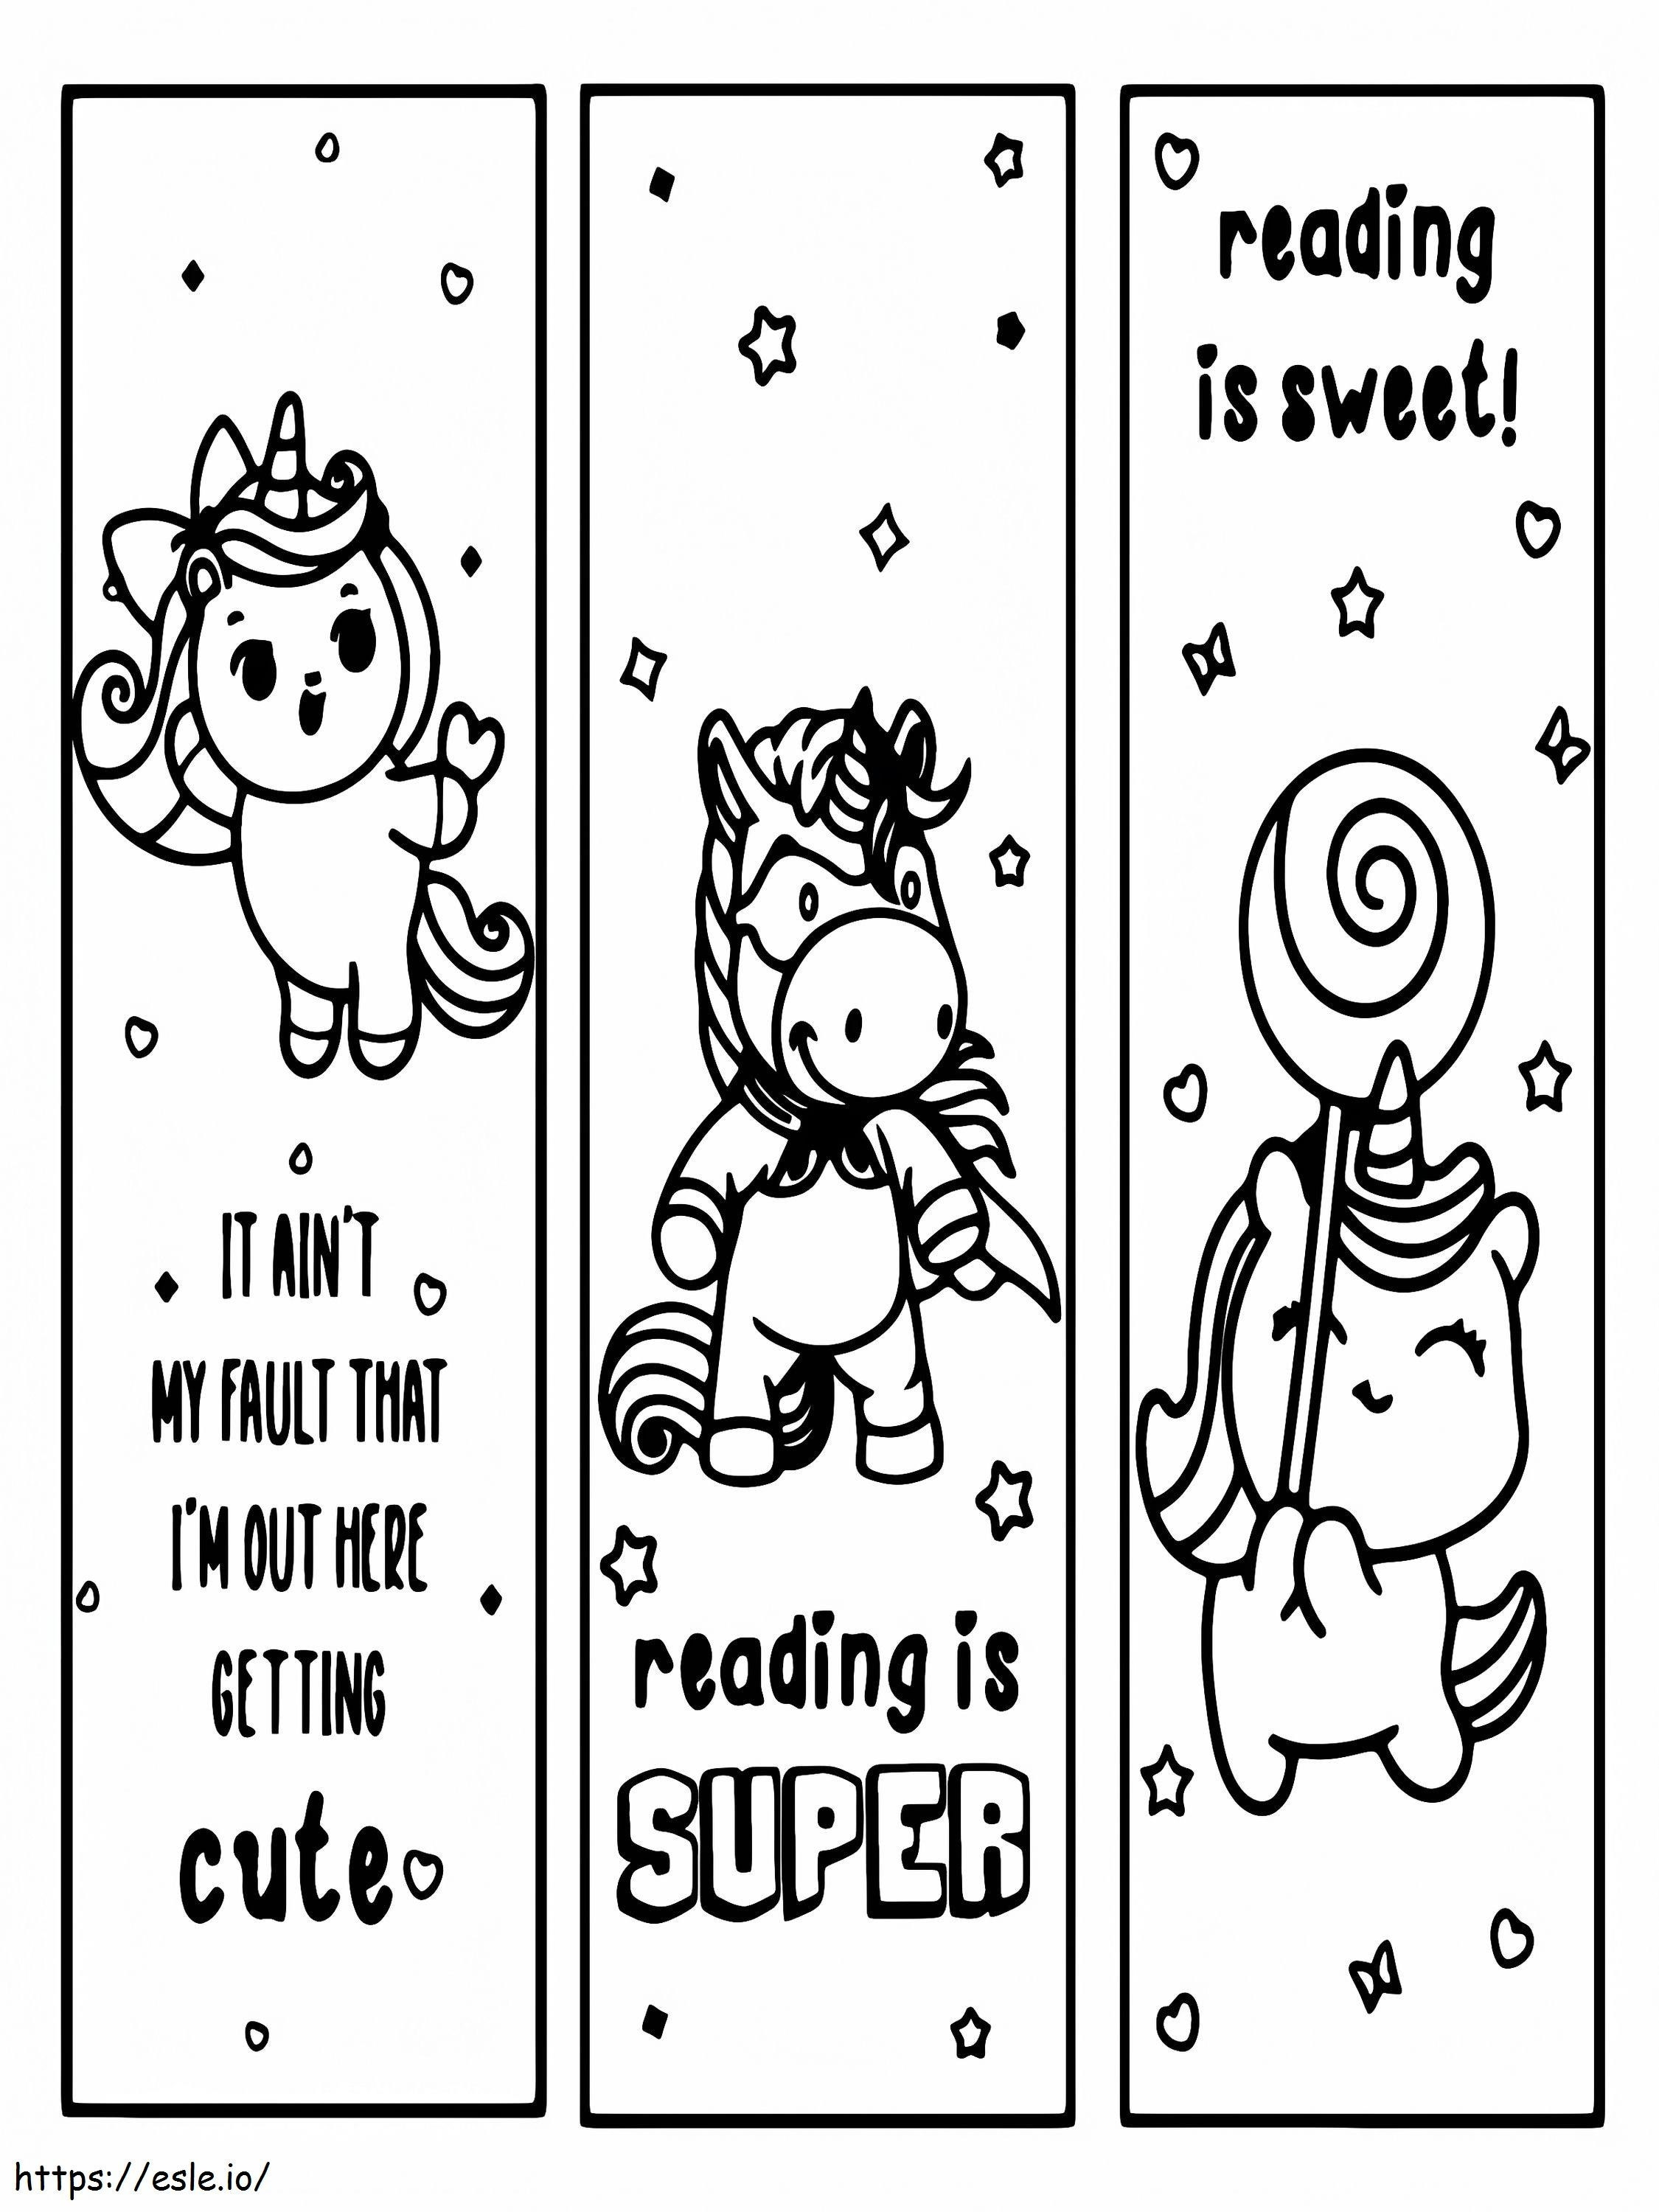 Reading Is Sweet And Super Bookmark For Kids coloring page